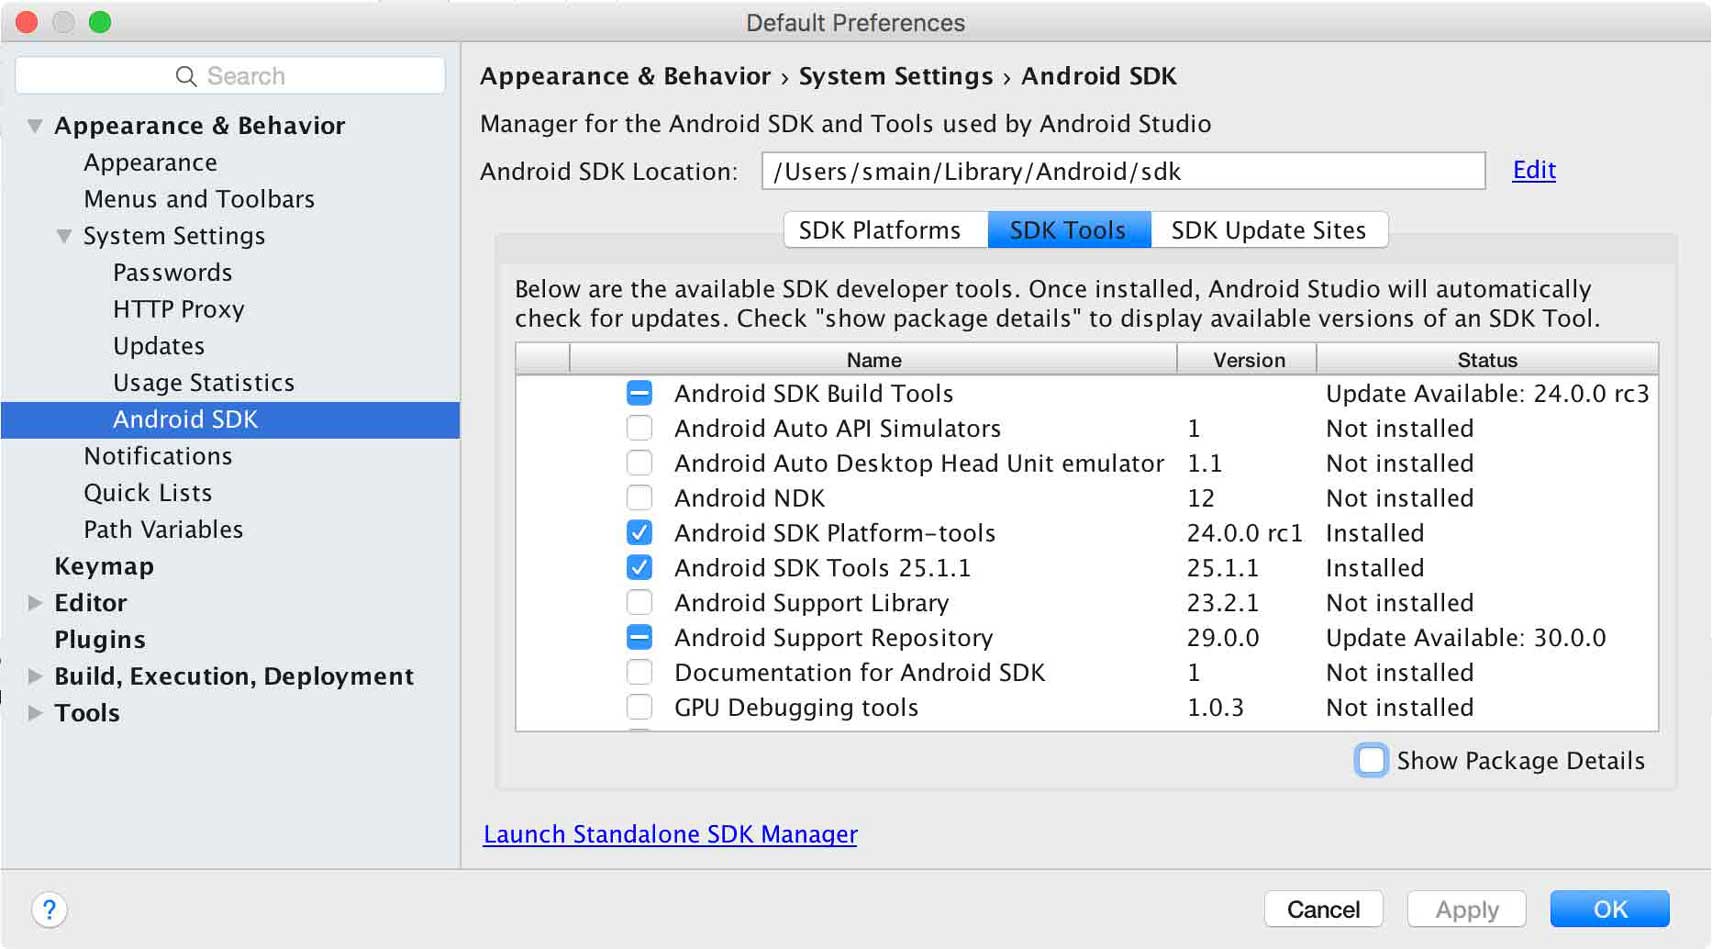 android emulator for mac 10.7